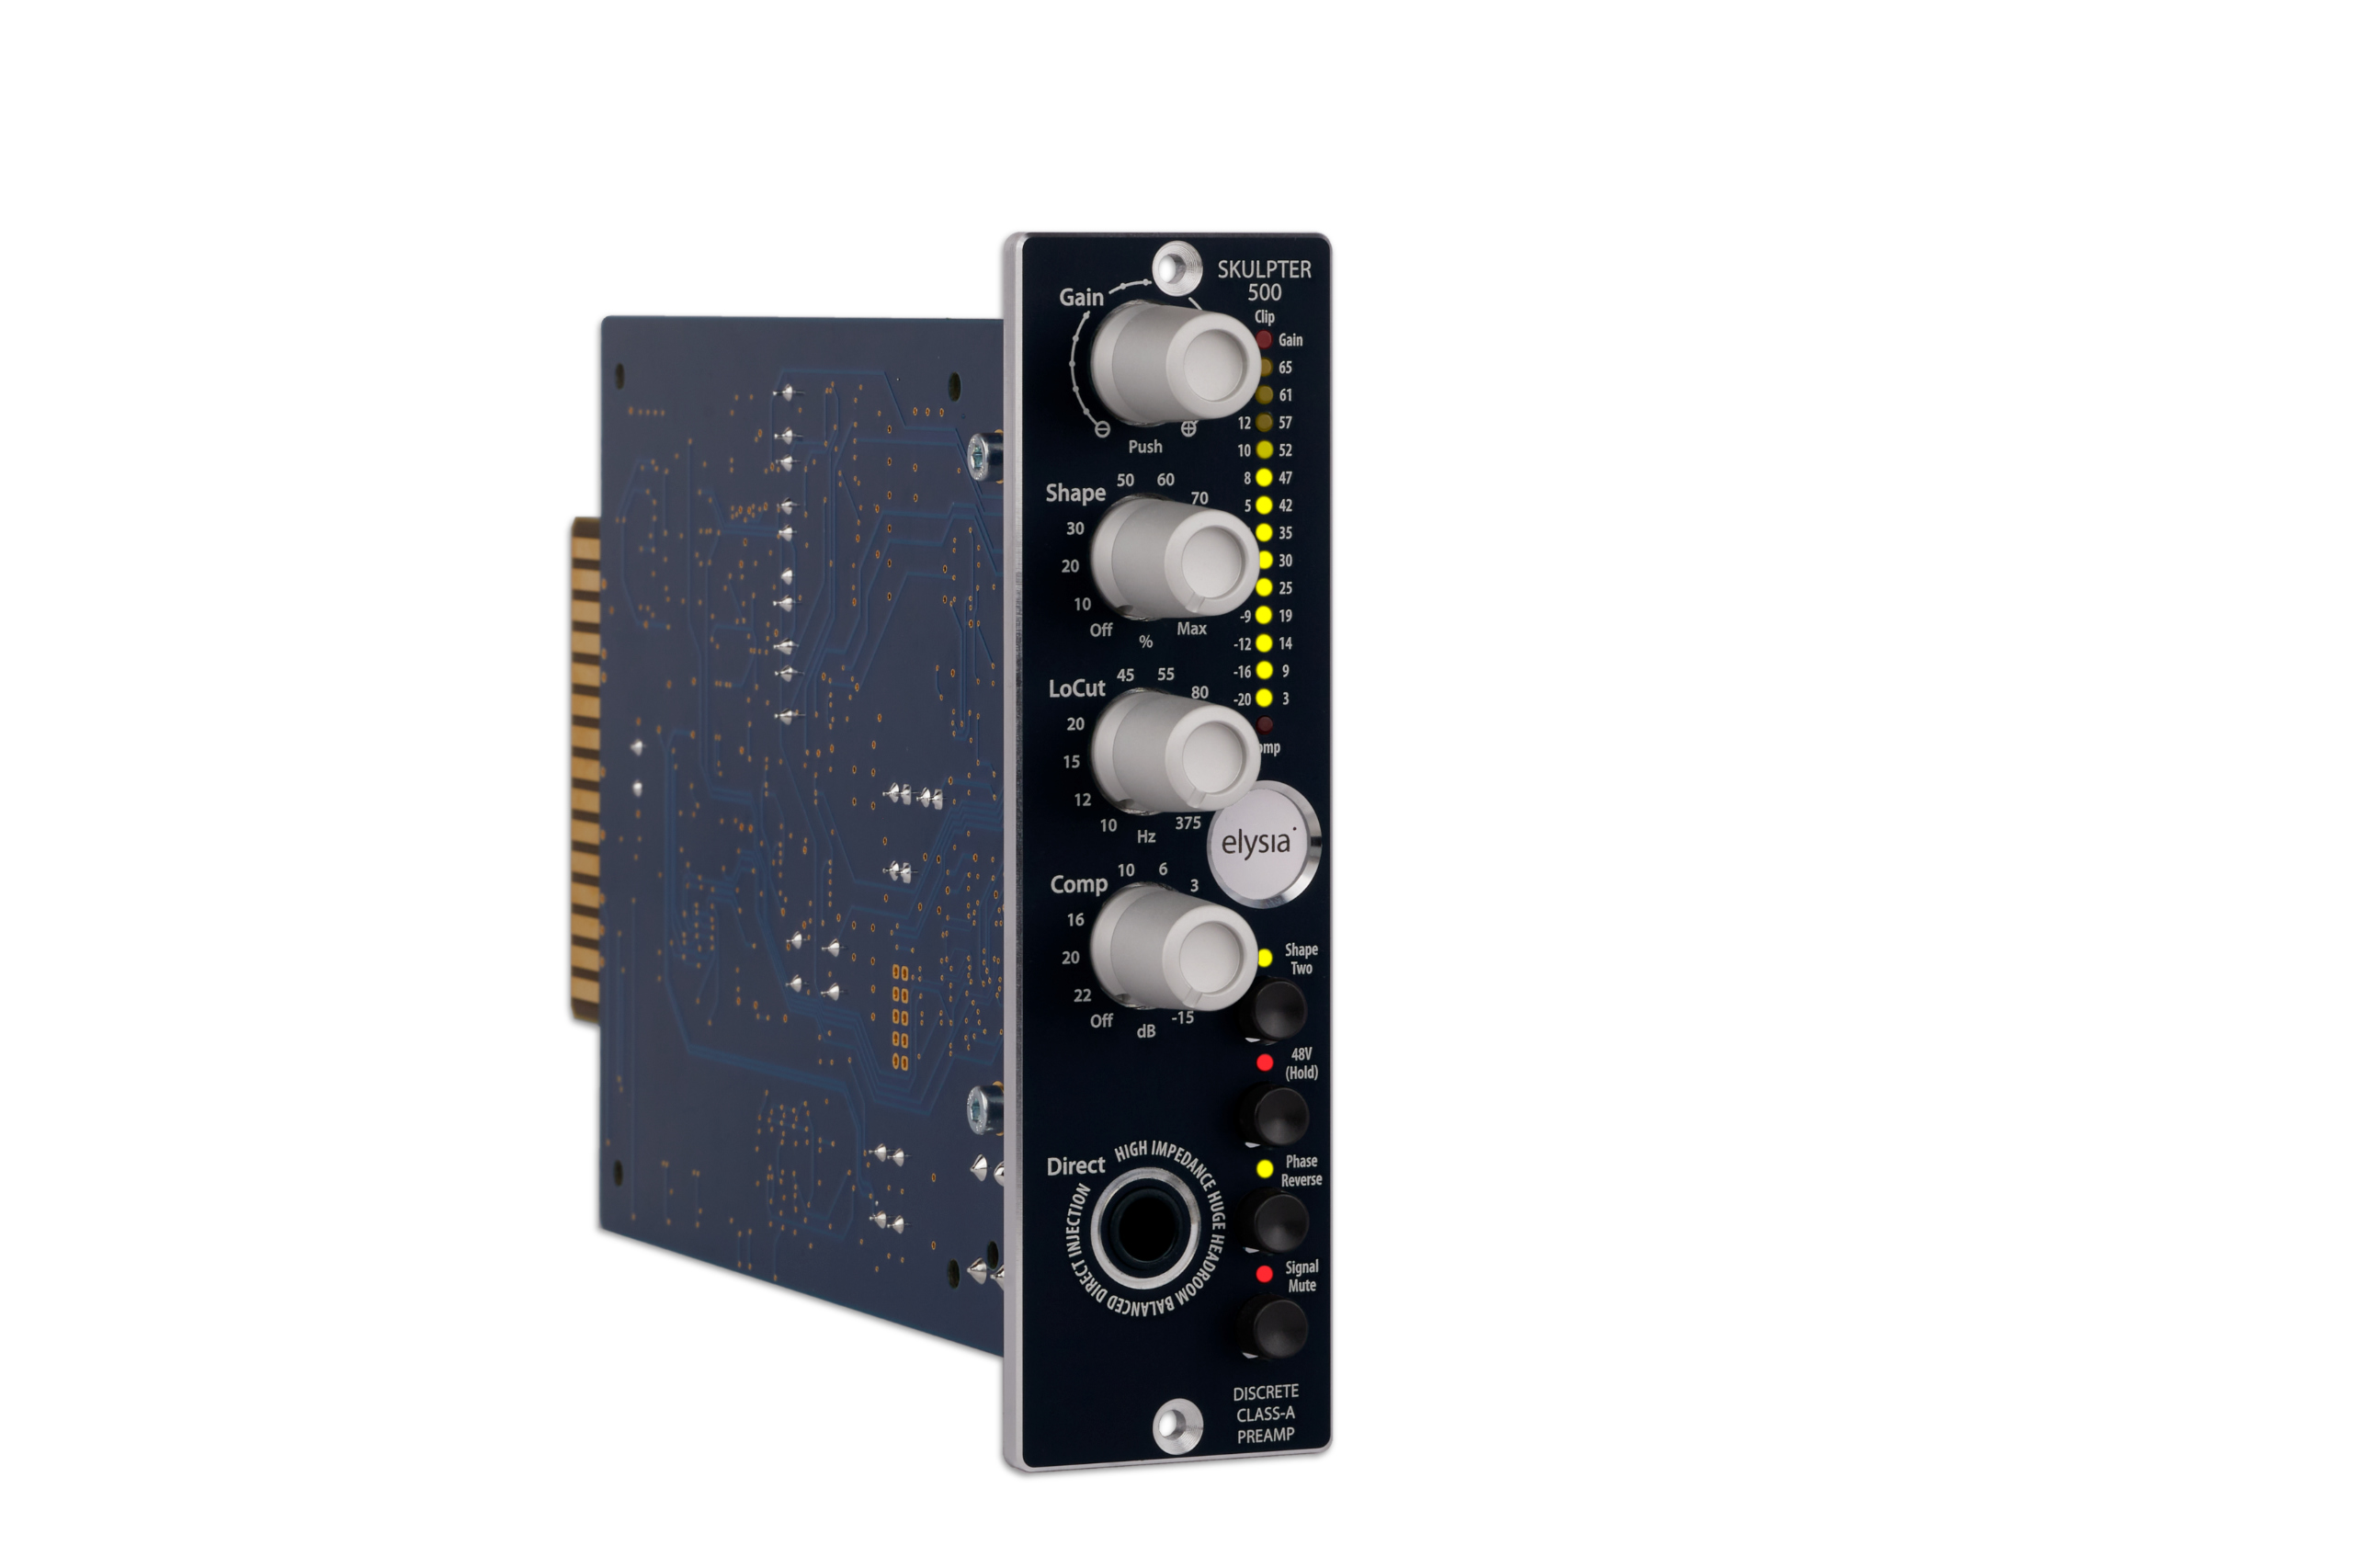 The elysia skulpter 500 is an analog high-end preamp with balanced DI input for recording mixing audio.